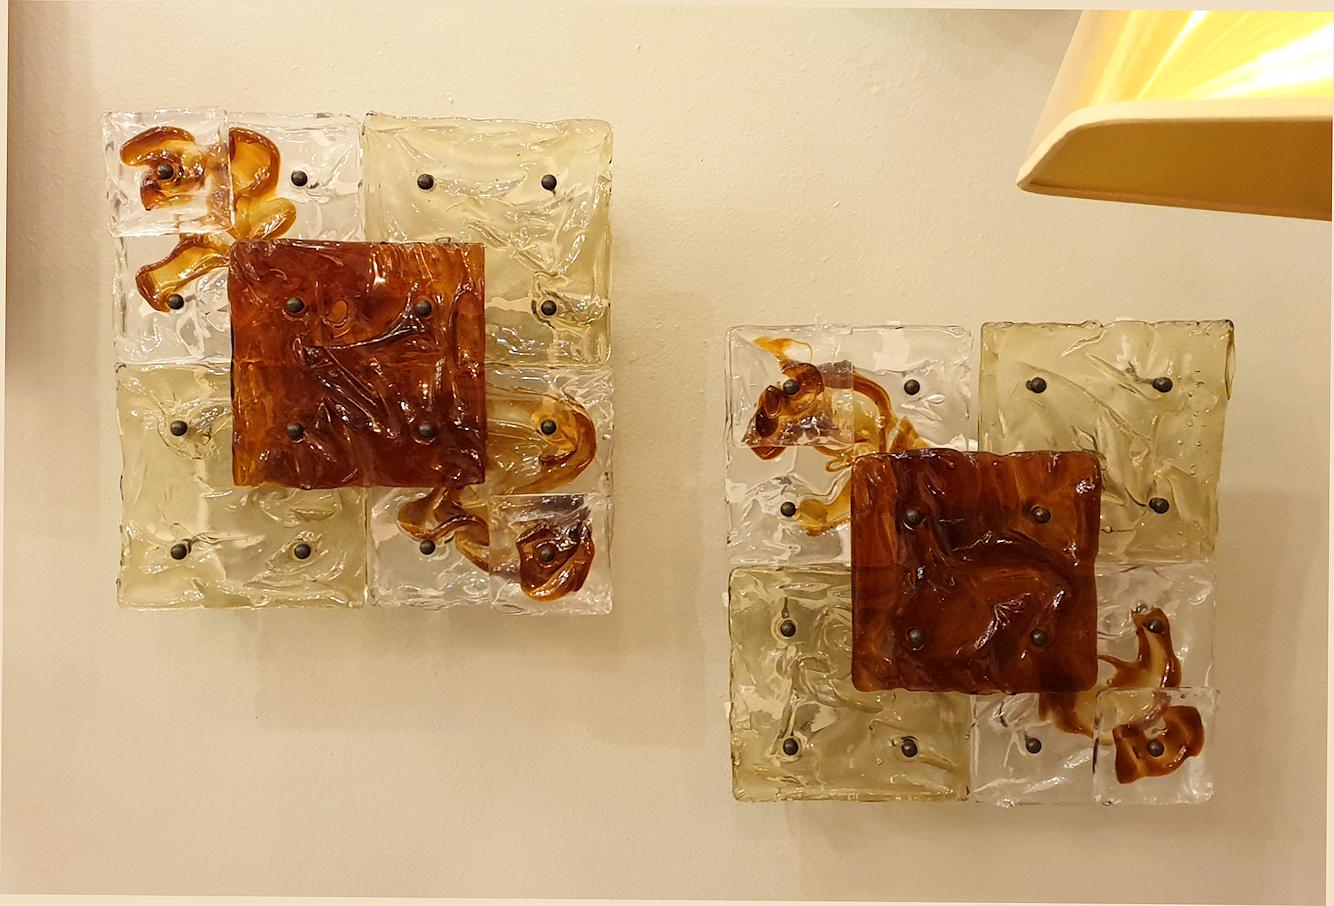 Pair of Mid-Century Modern Italian Murano clear and light brown glass square sconces or flush mount fixtures.
By Toni Zuccheri for Venini, Italy, 1970s
The vintage sconces have one candelabra light each and have been rewired for the US.
This pair